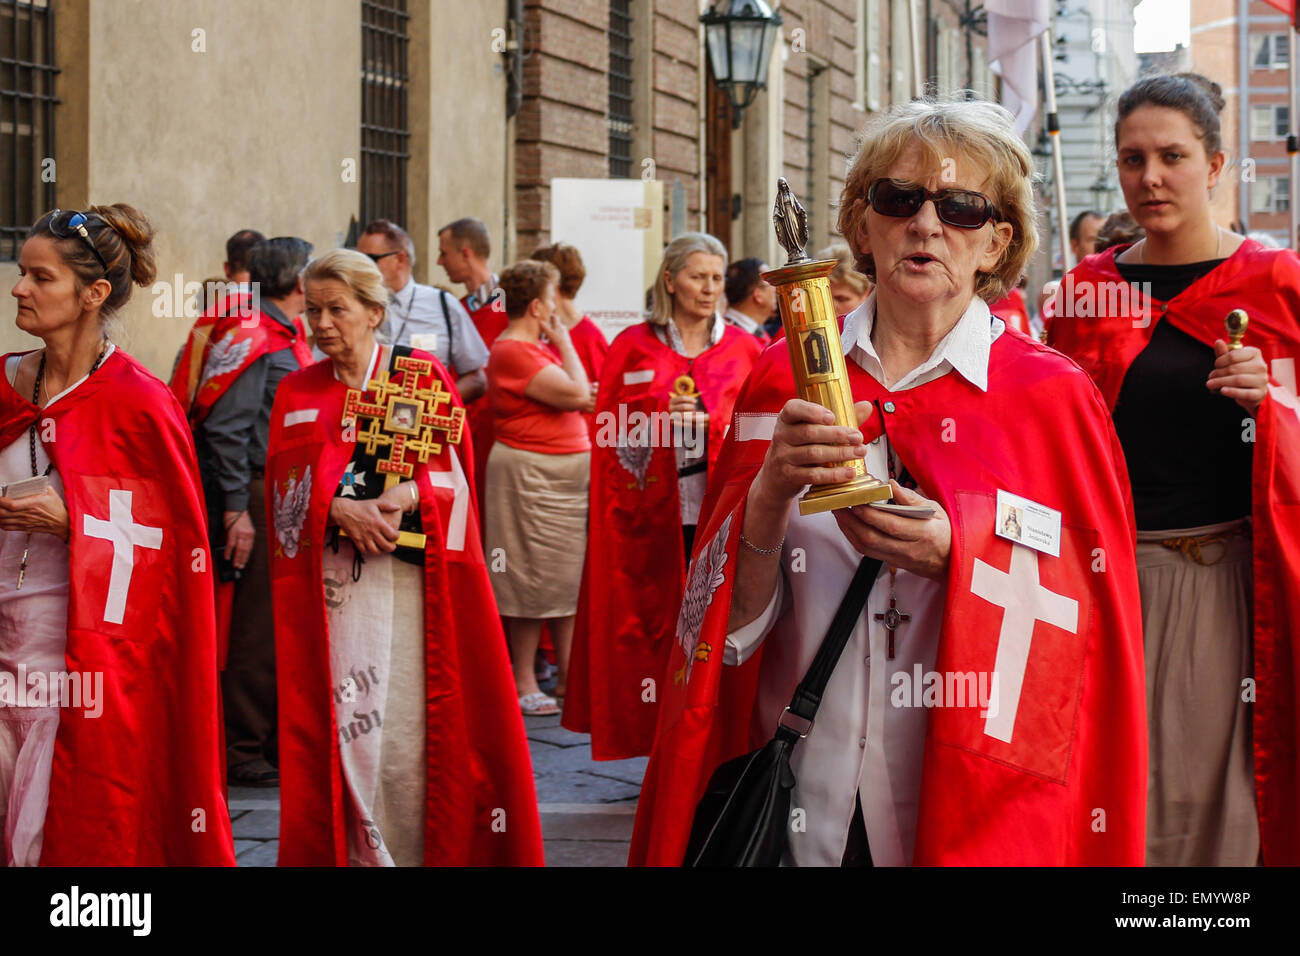 Torino, Italy. 24th Apr, 2015. A hundred faithful Poles, Cavalry of Jesus Christ the King, who visited the Holy Shroud. They are presented with red velvet and gold cloaks, hats ermine, statues of the Virgin Mary, crucifixes and holy cards to be distributed to the crowd. © Elena Aquila/Pacific Press/Alamy Live News Stock Photo